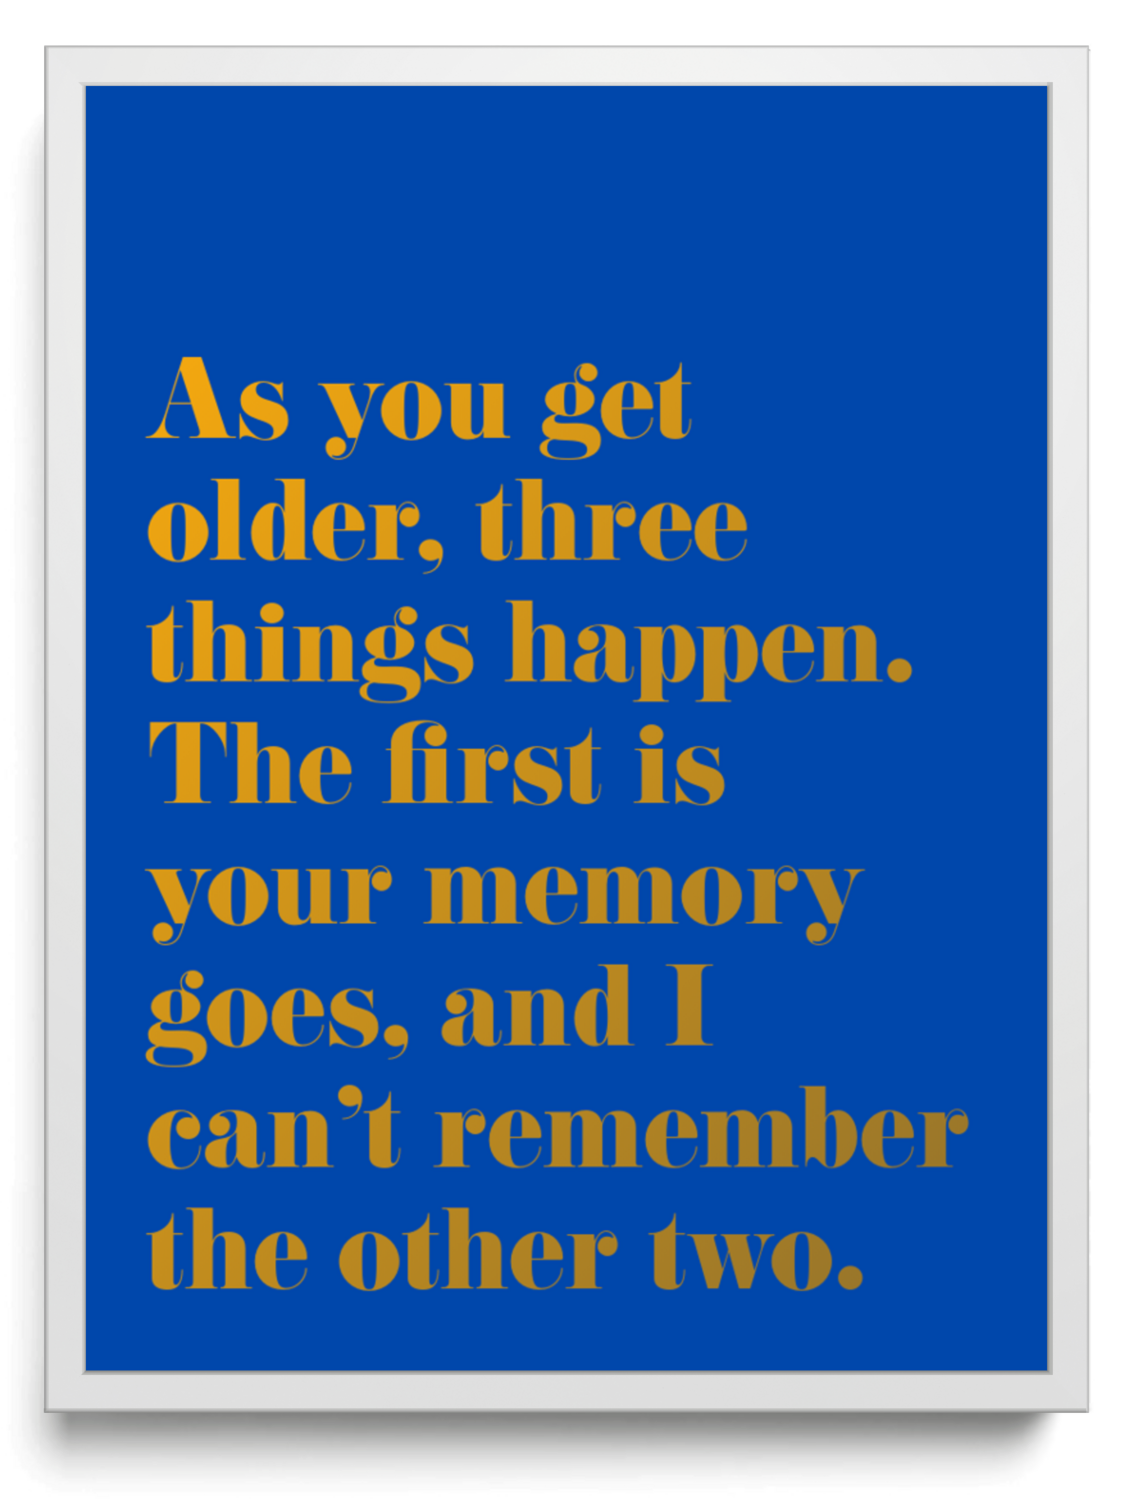 As you get older, three things happen. The first is your memory goes, and I can’t remember the other two. framed typographic print